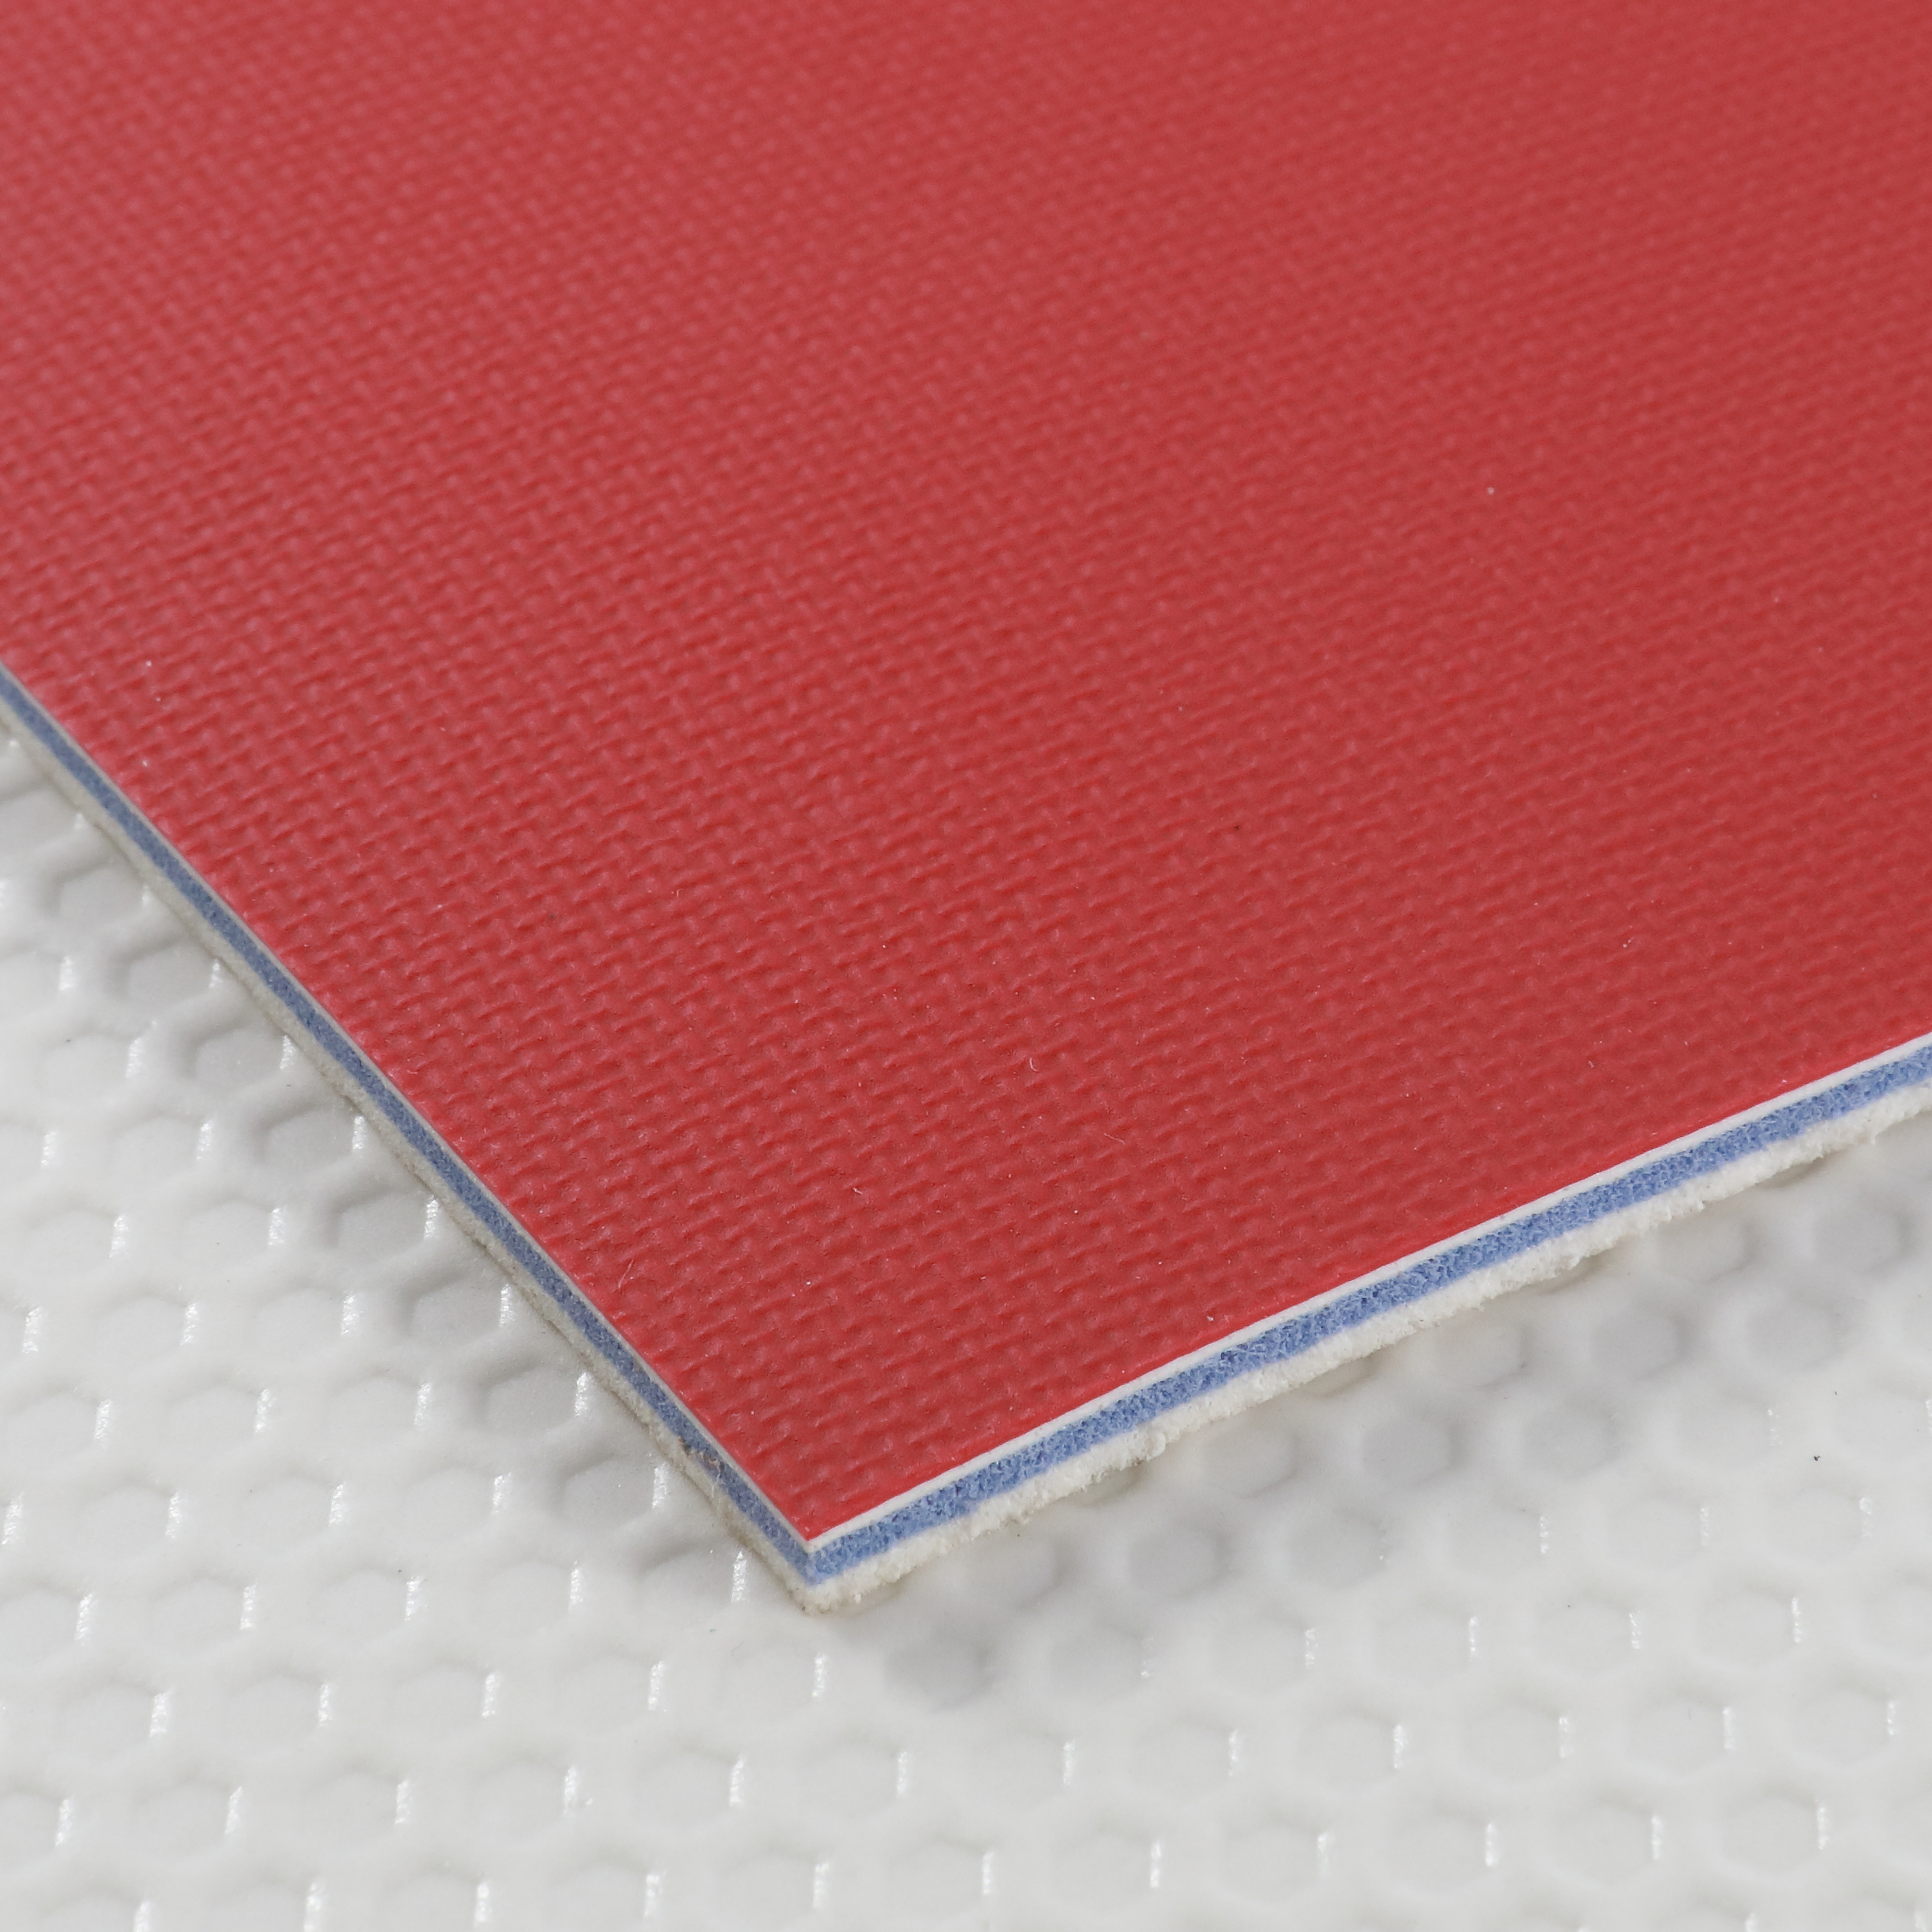 Standard Size Customized PVC Flooring For Gym